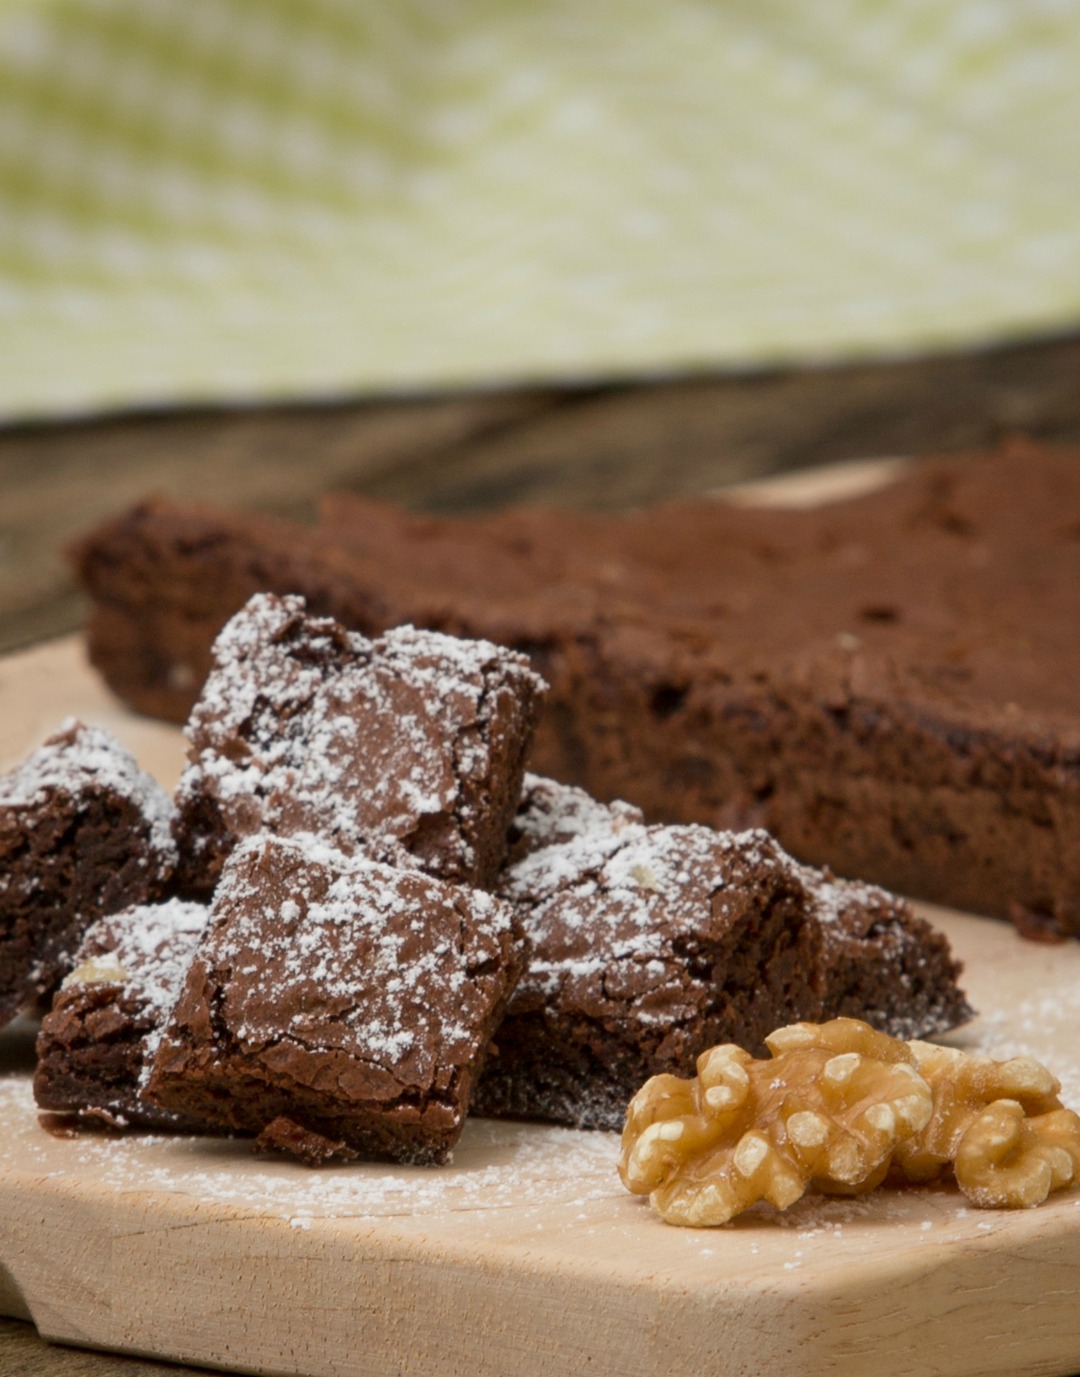 Easiest chocolate brownie recipe ever - perfect for you and the kids to do together. Just look at it! #recipes #brownies #chocolate